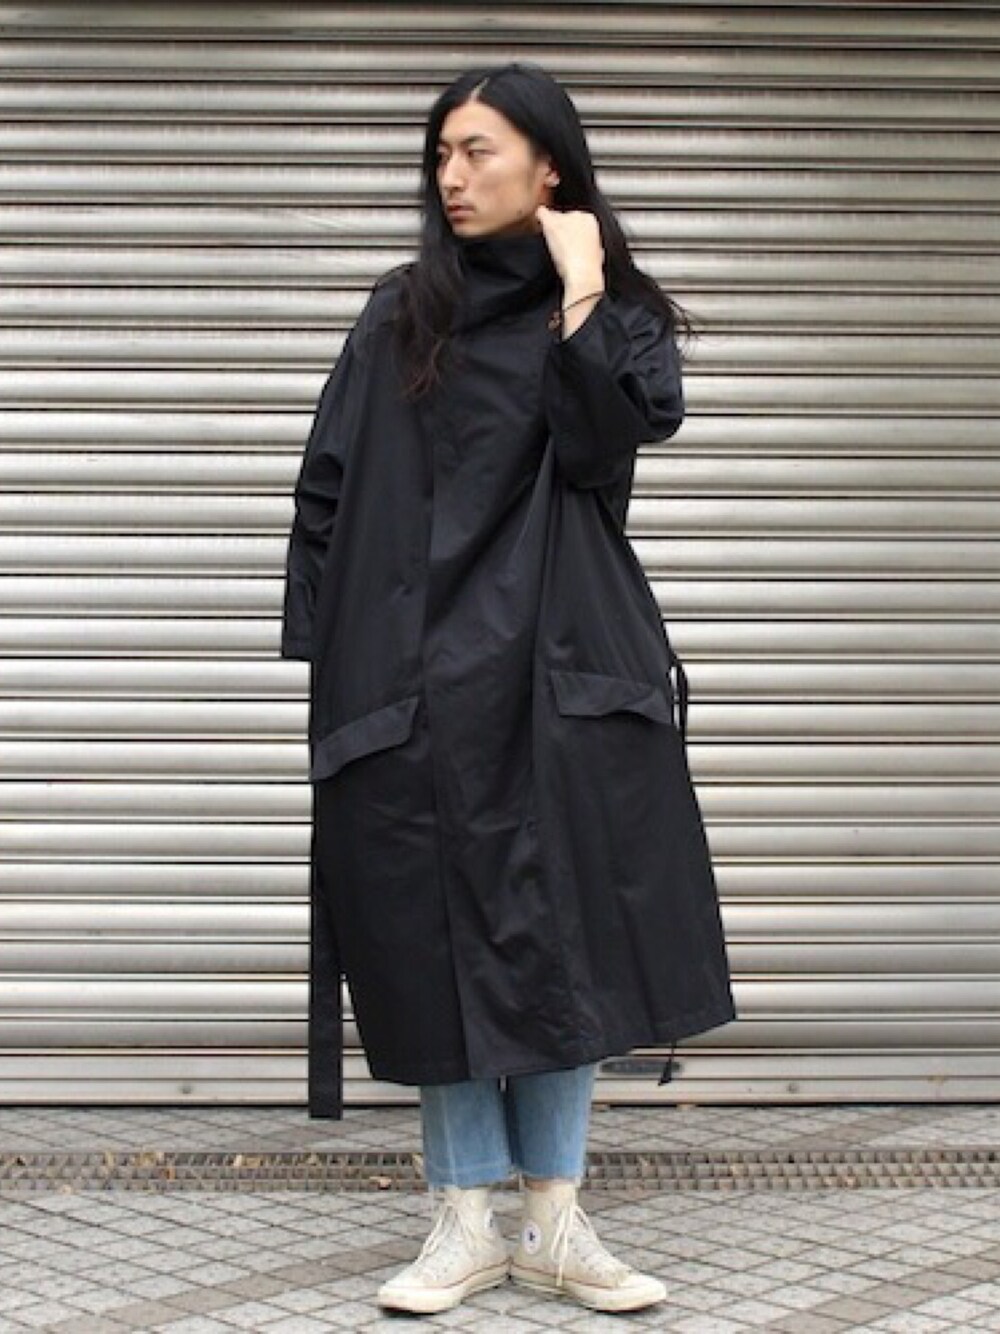 whowhat tibet coat フーワットチベットコート 名作 ブラックnepenthes 